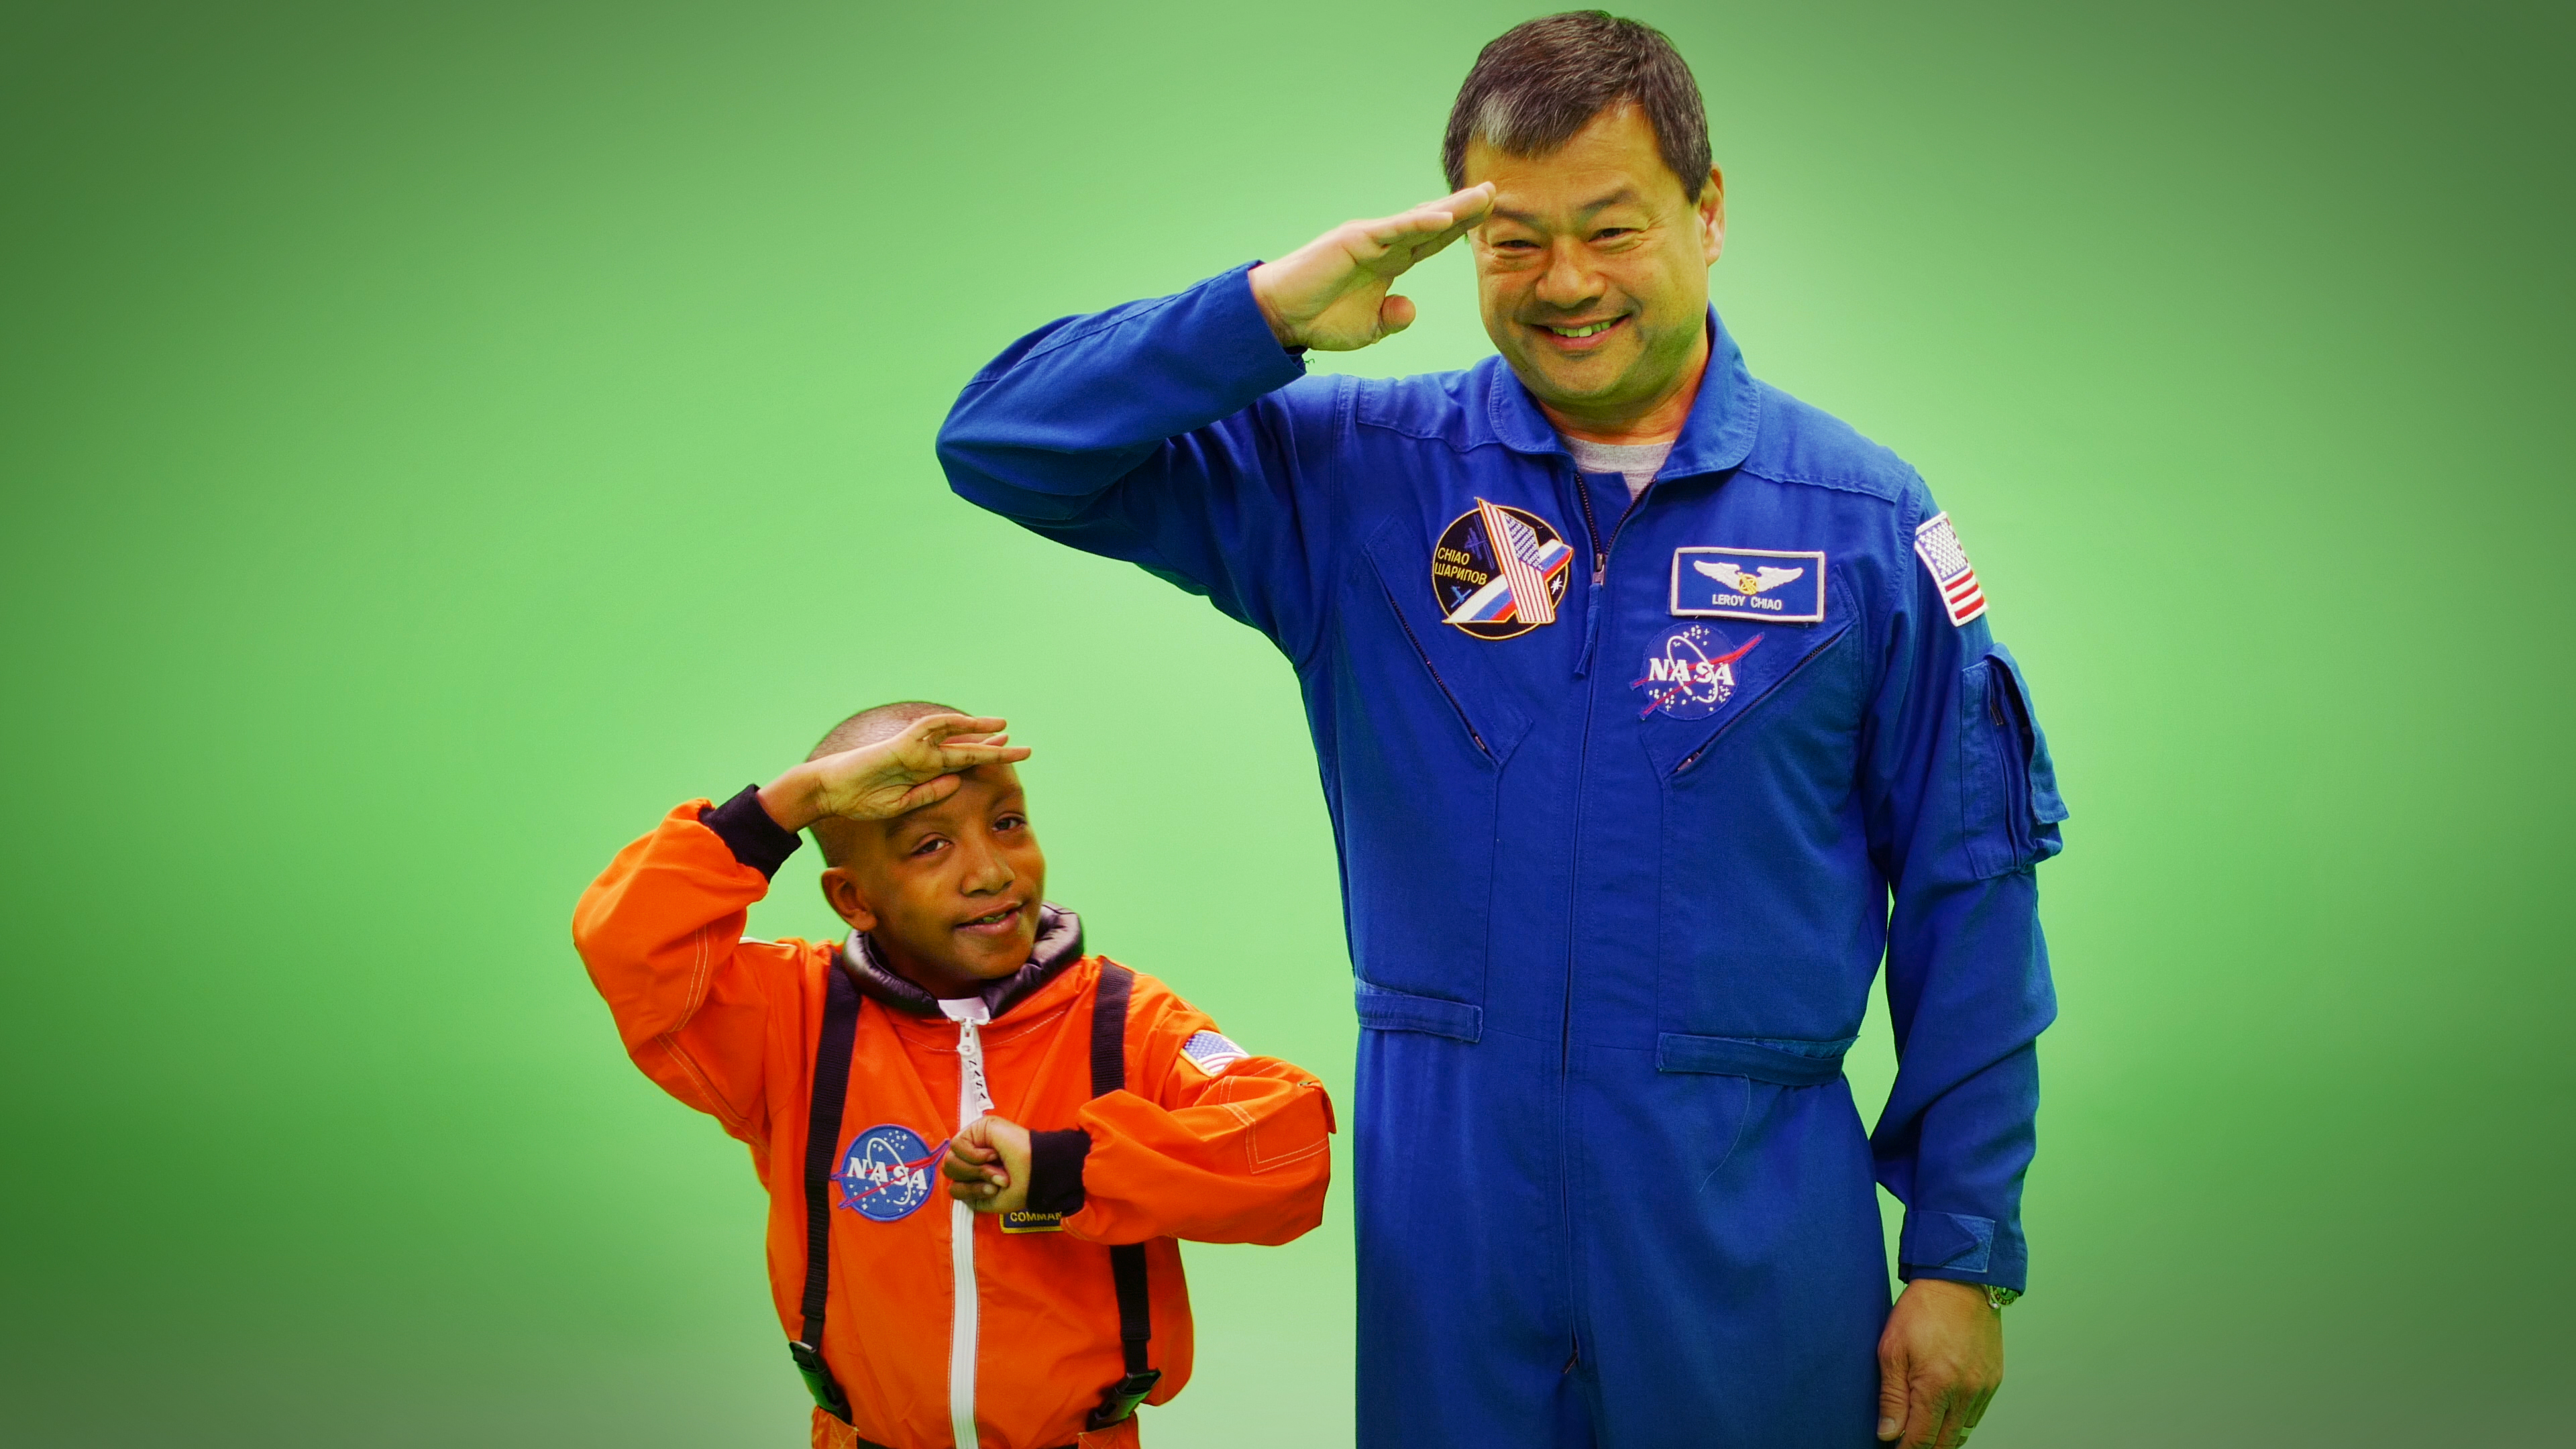 Zayden Wright and Cmdr. LeRoy Chiao